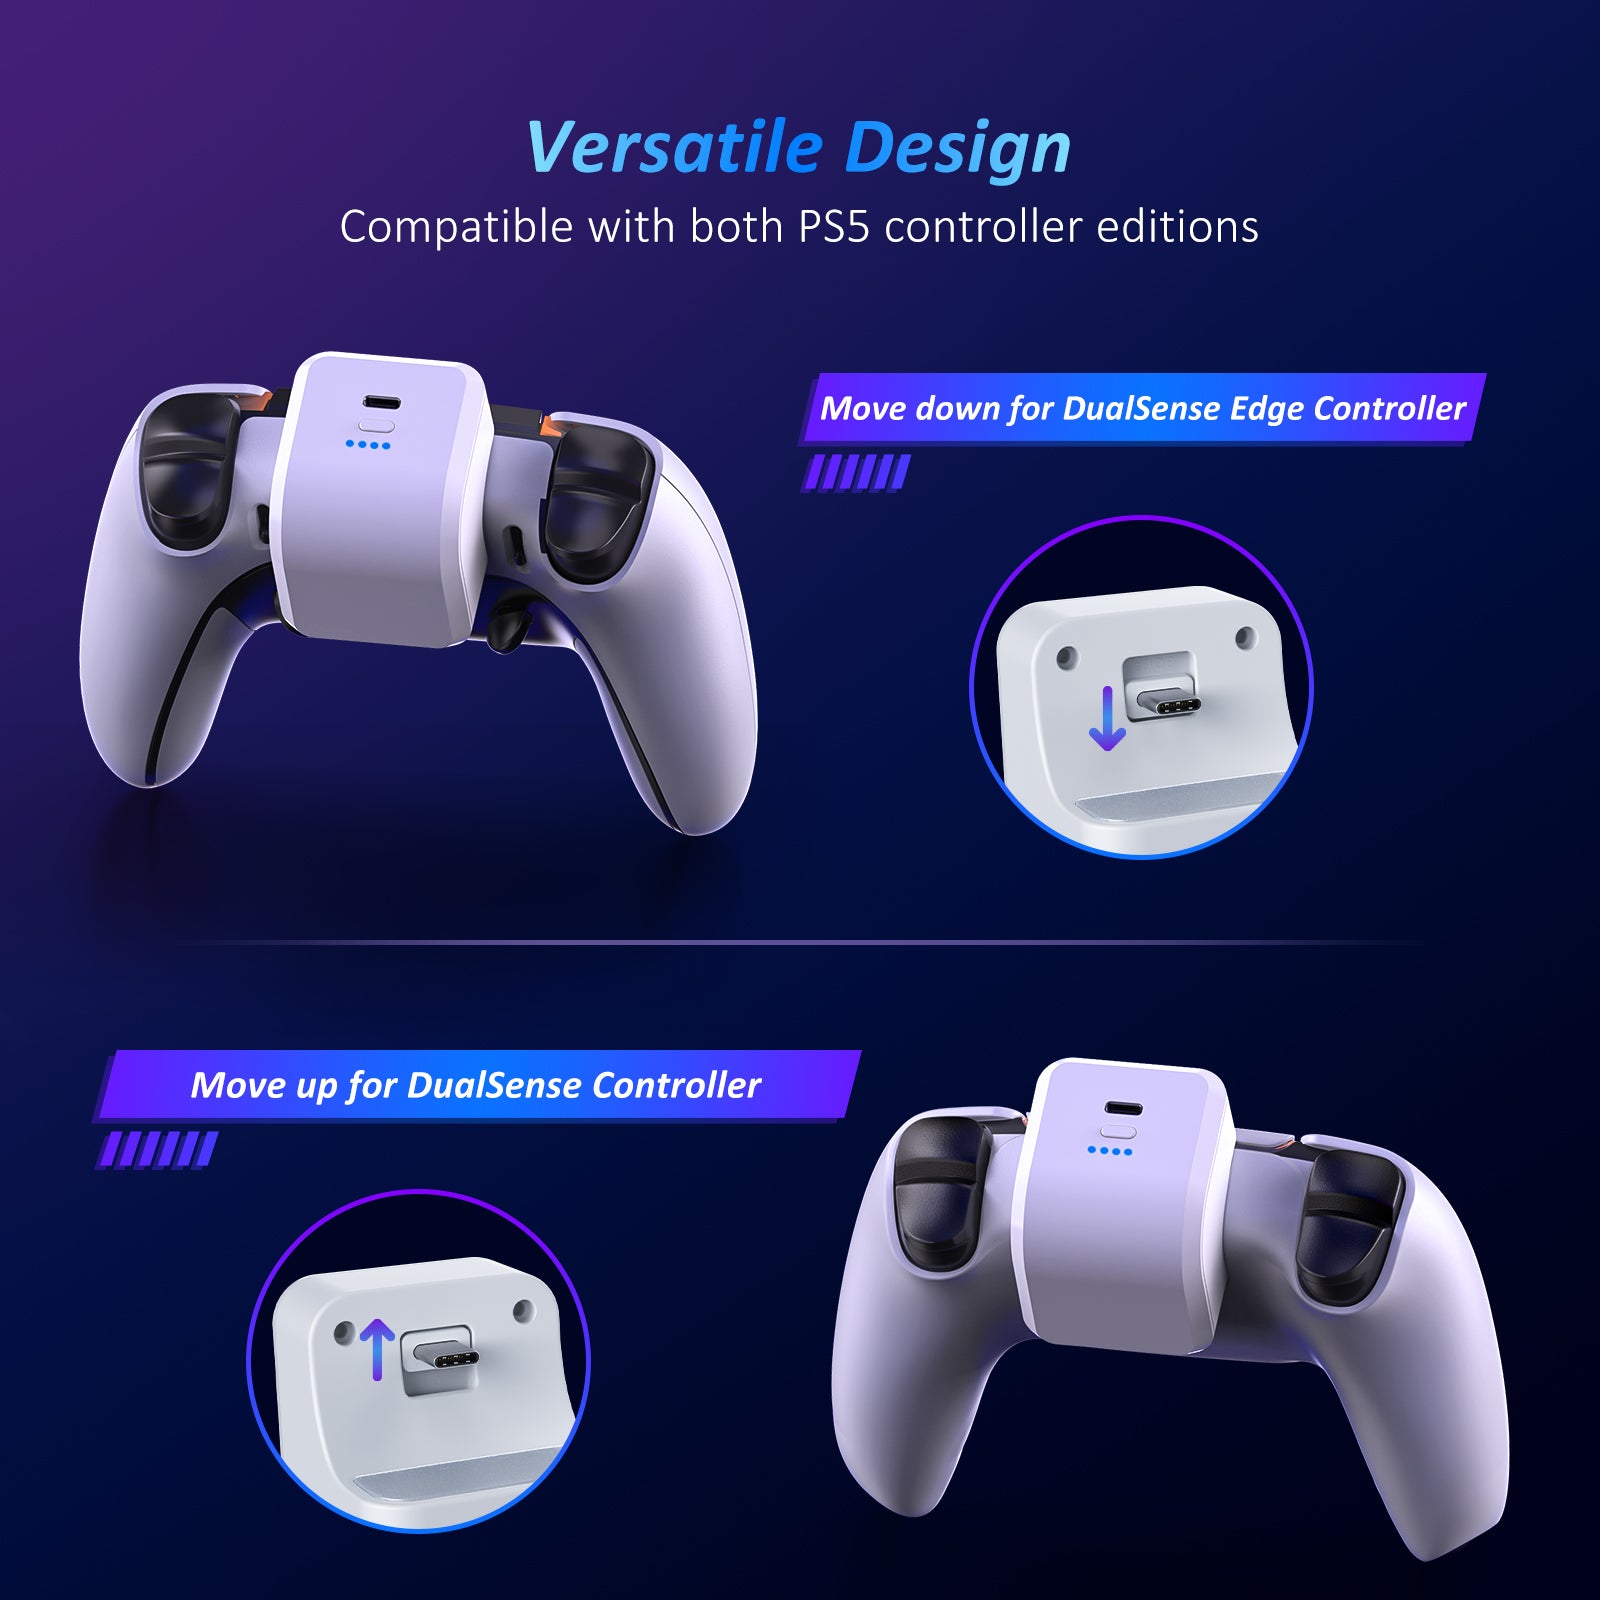 The battery pack is able to charge both the PS5 DualSense controller and the console.